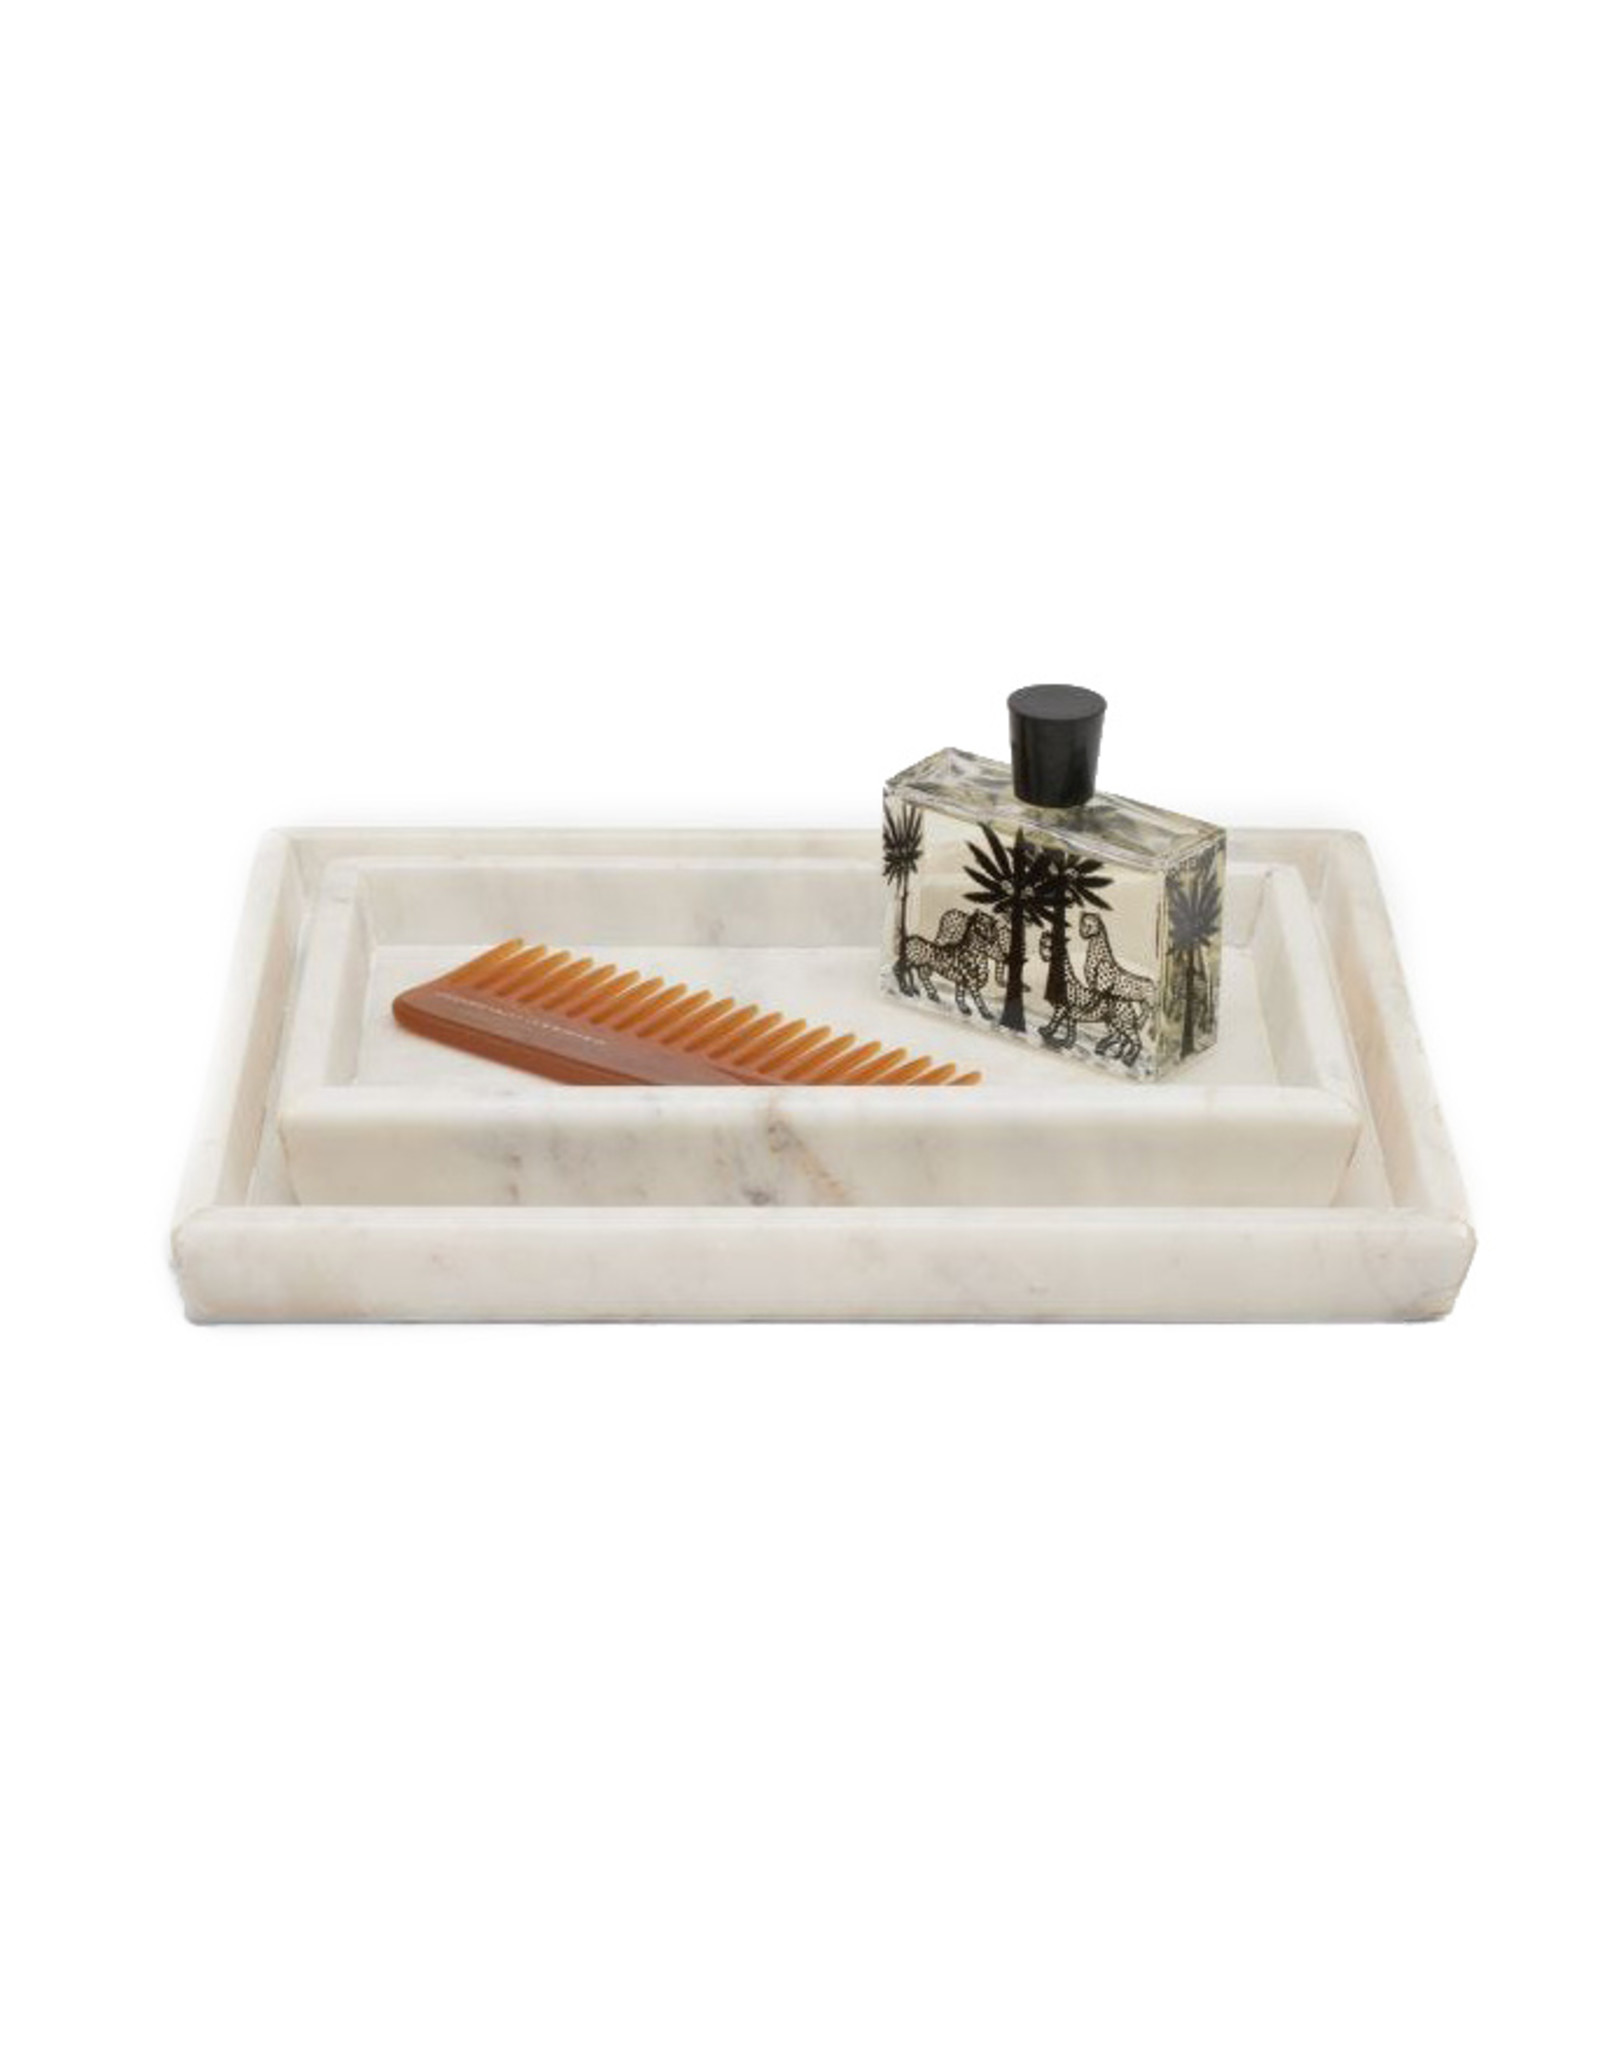 Pigeon and Poodle White Marble Tray, Lg